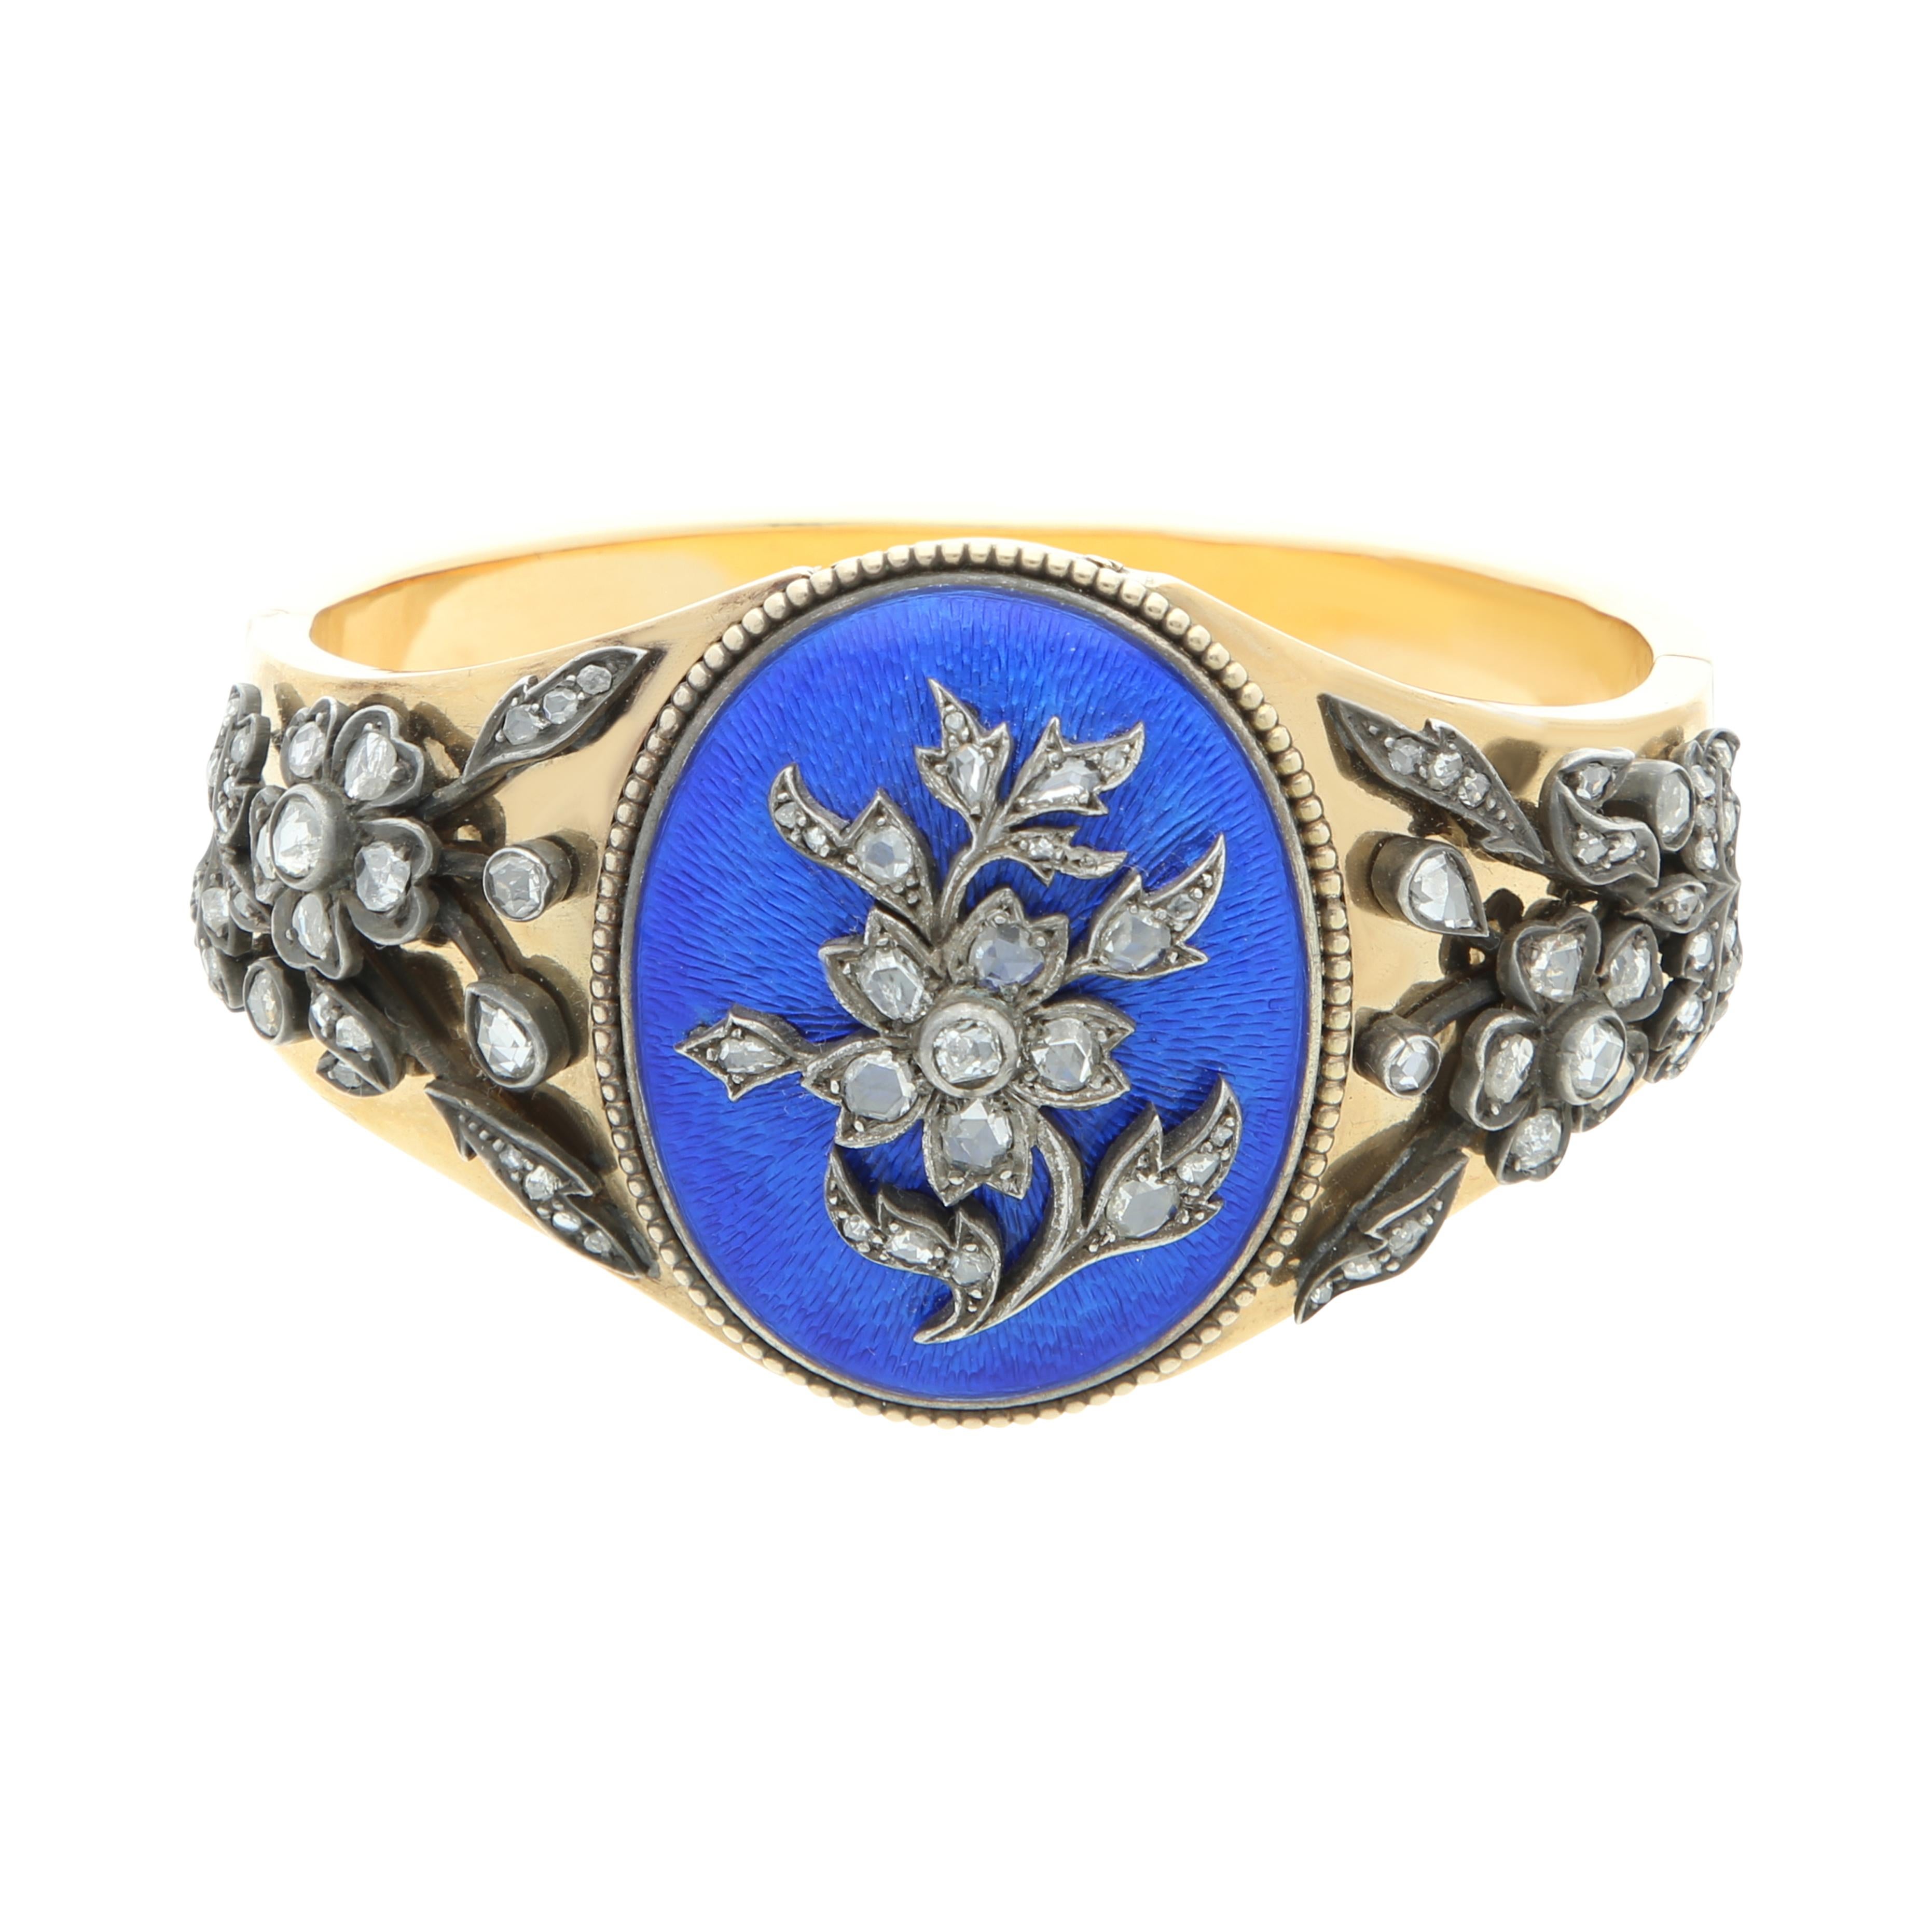 Antique yellow 18k gold. Enameled old cut diamond, bangle bracelet. a magnificent  bangle bracelet crafted in yellow gold and silver, blue Enamel - the Flowers is accented with old mine cut and rose cut diamonds. It was belong to a royal family in